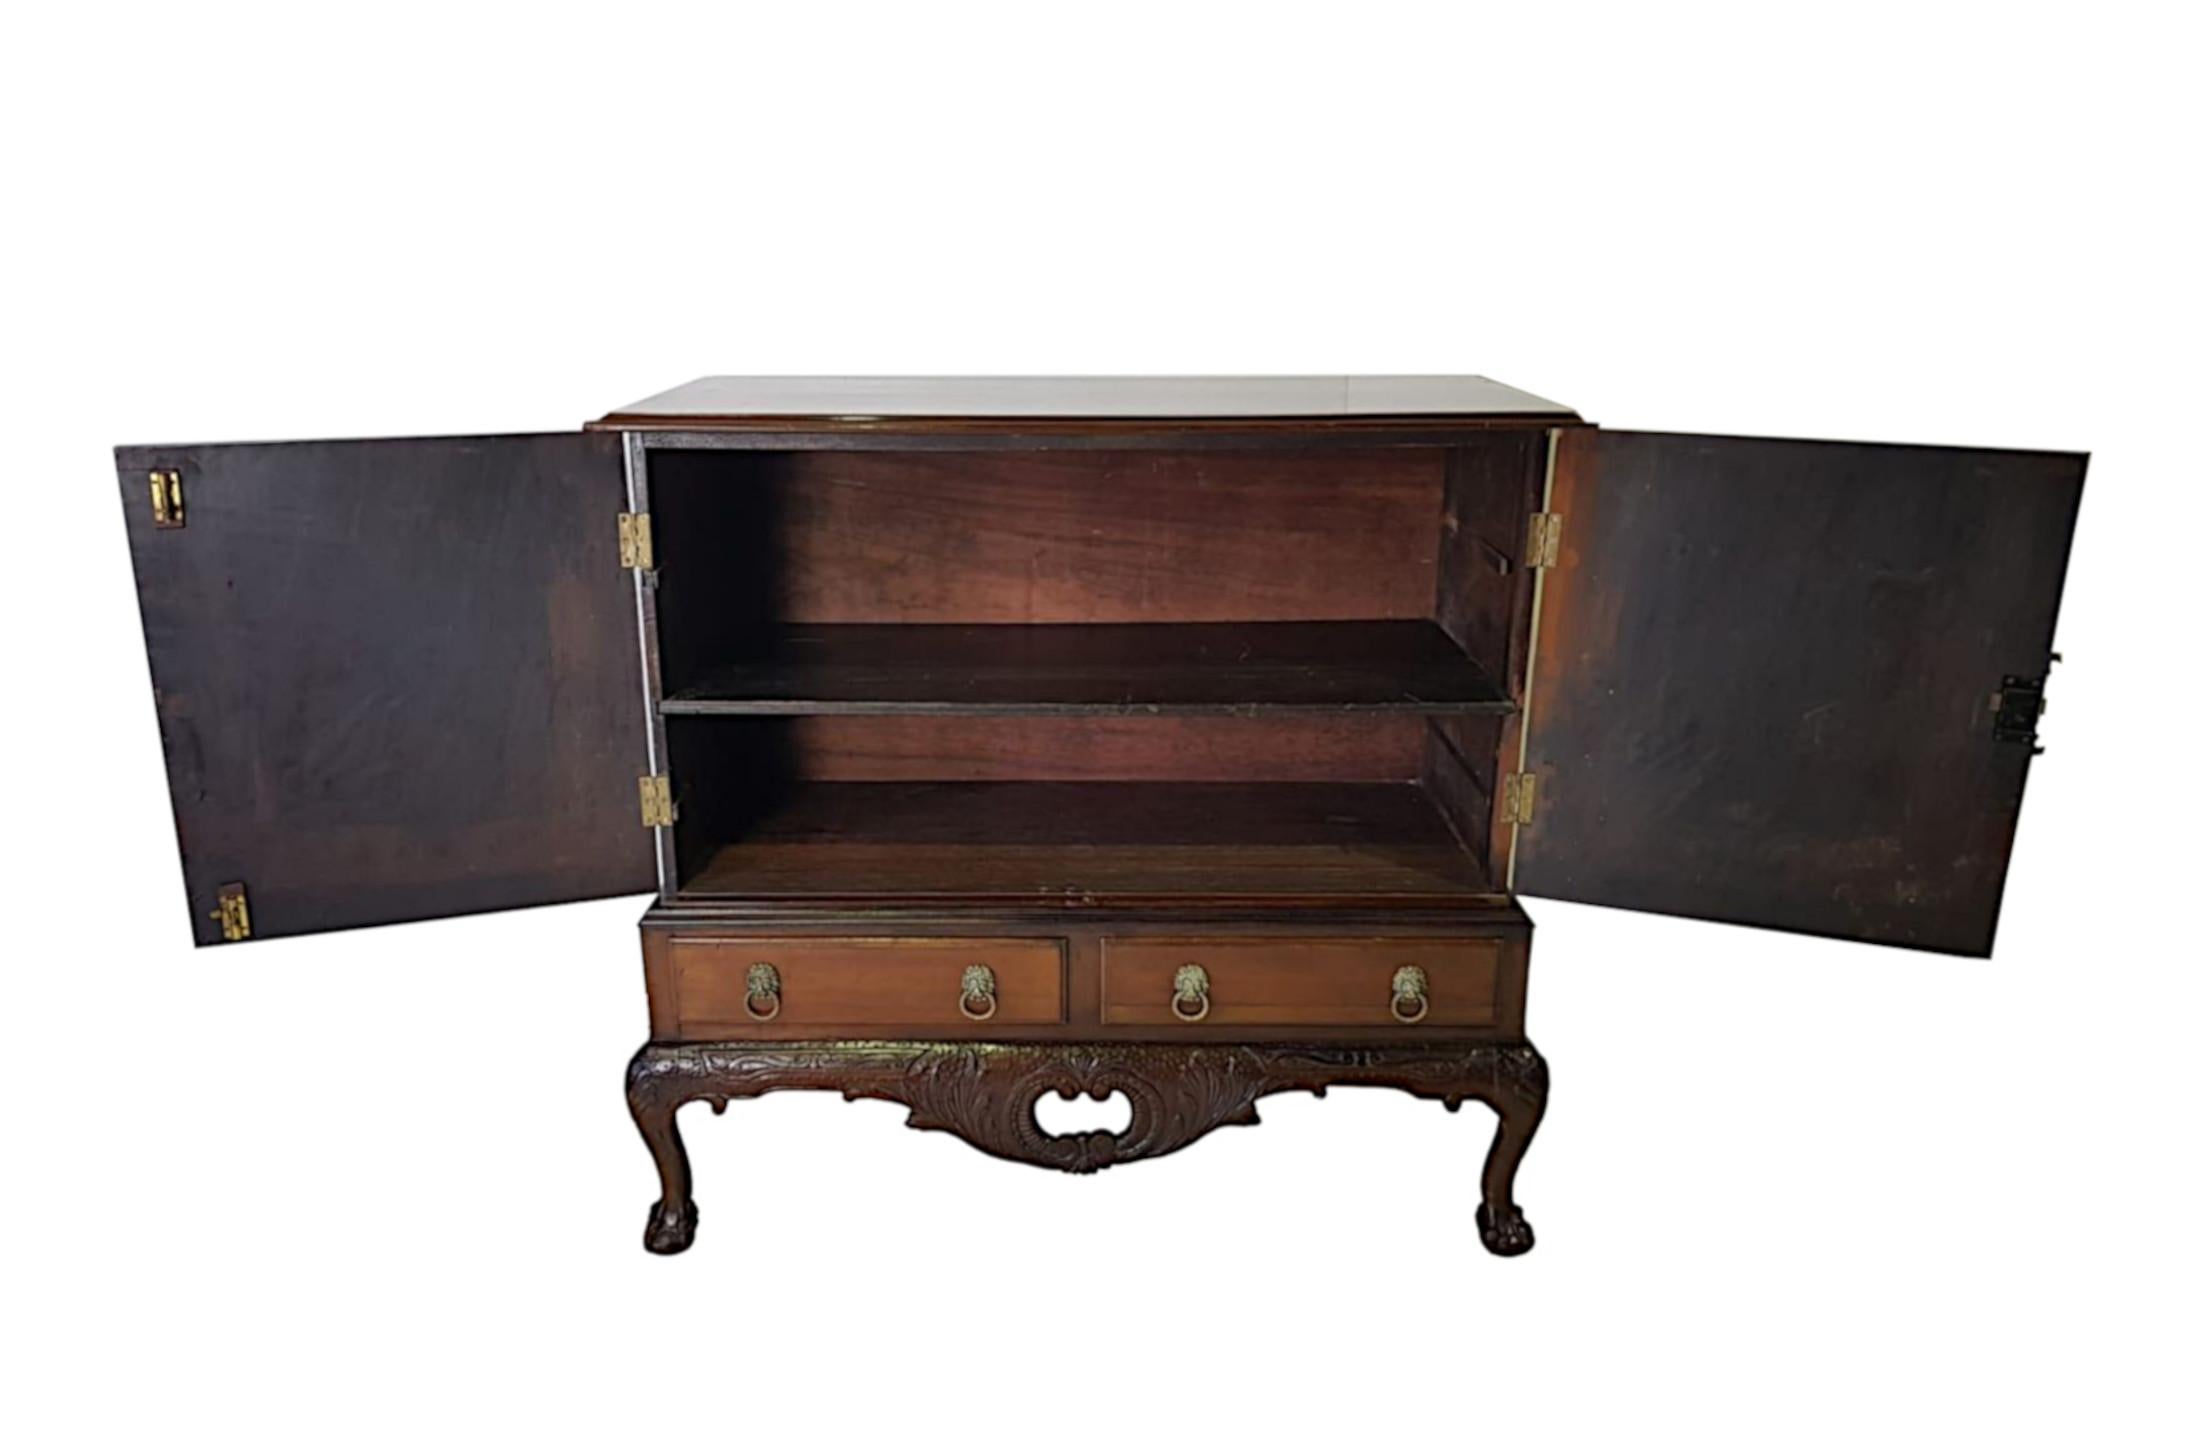 An Edwardian mahogany blanket press of rectangular form in the manner of Thomas Chippendale. The shaped and moulded top raised over two doors with shaped brass hinges, escutcheon and reeded closing slip opening to reveal shelved interior, supported